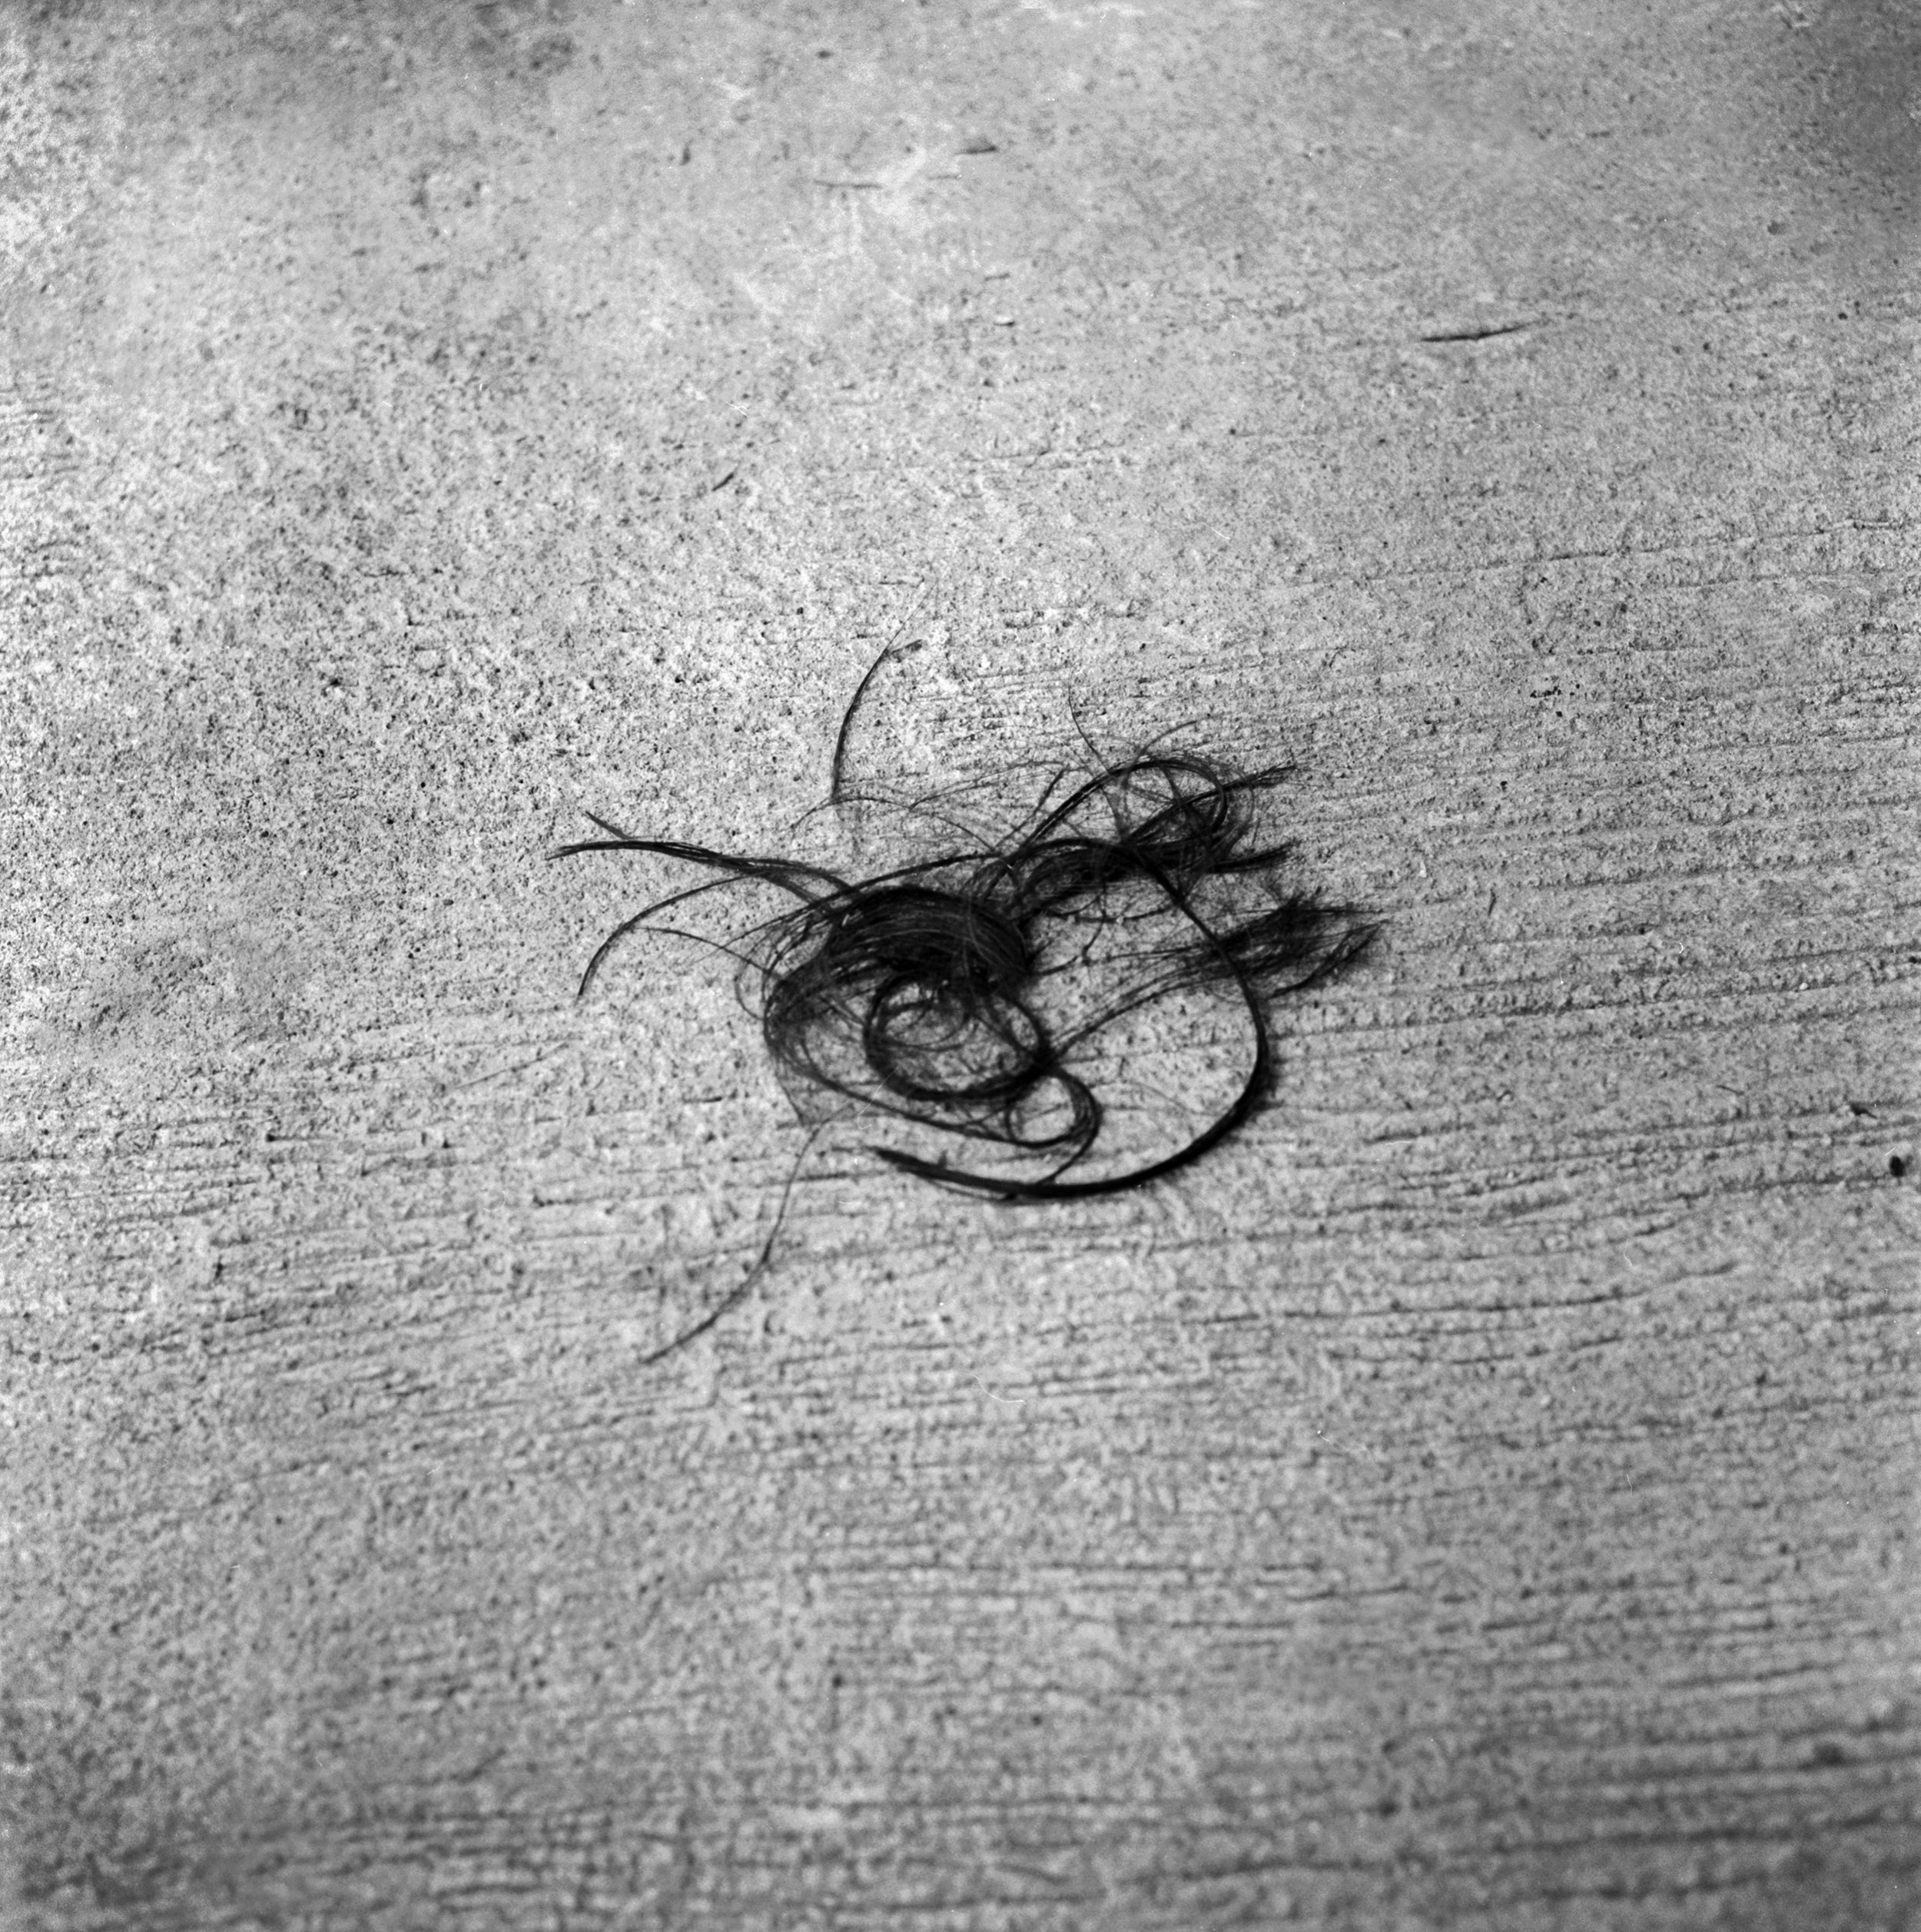  "Fallen Hair" At the Agape orphanage for those living with HIV. Chiang Mai, Thailand. The mid-1990s. 